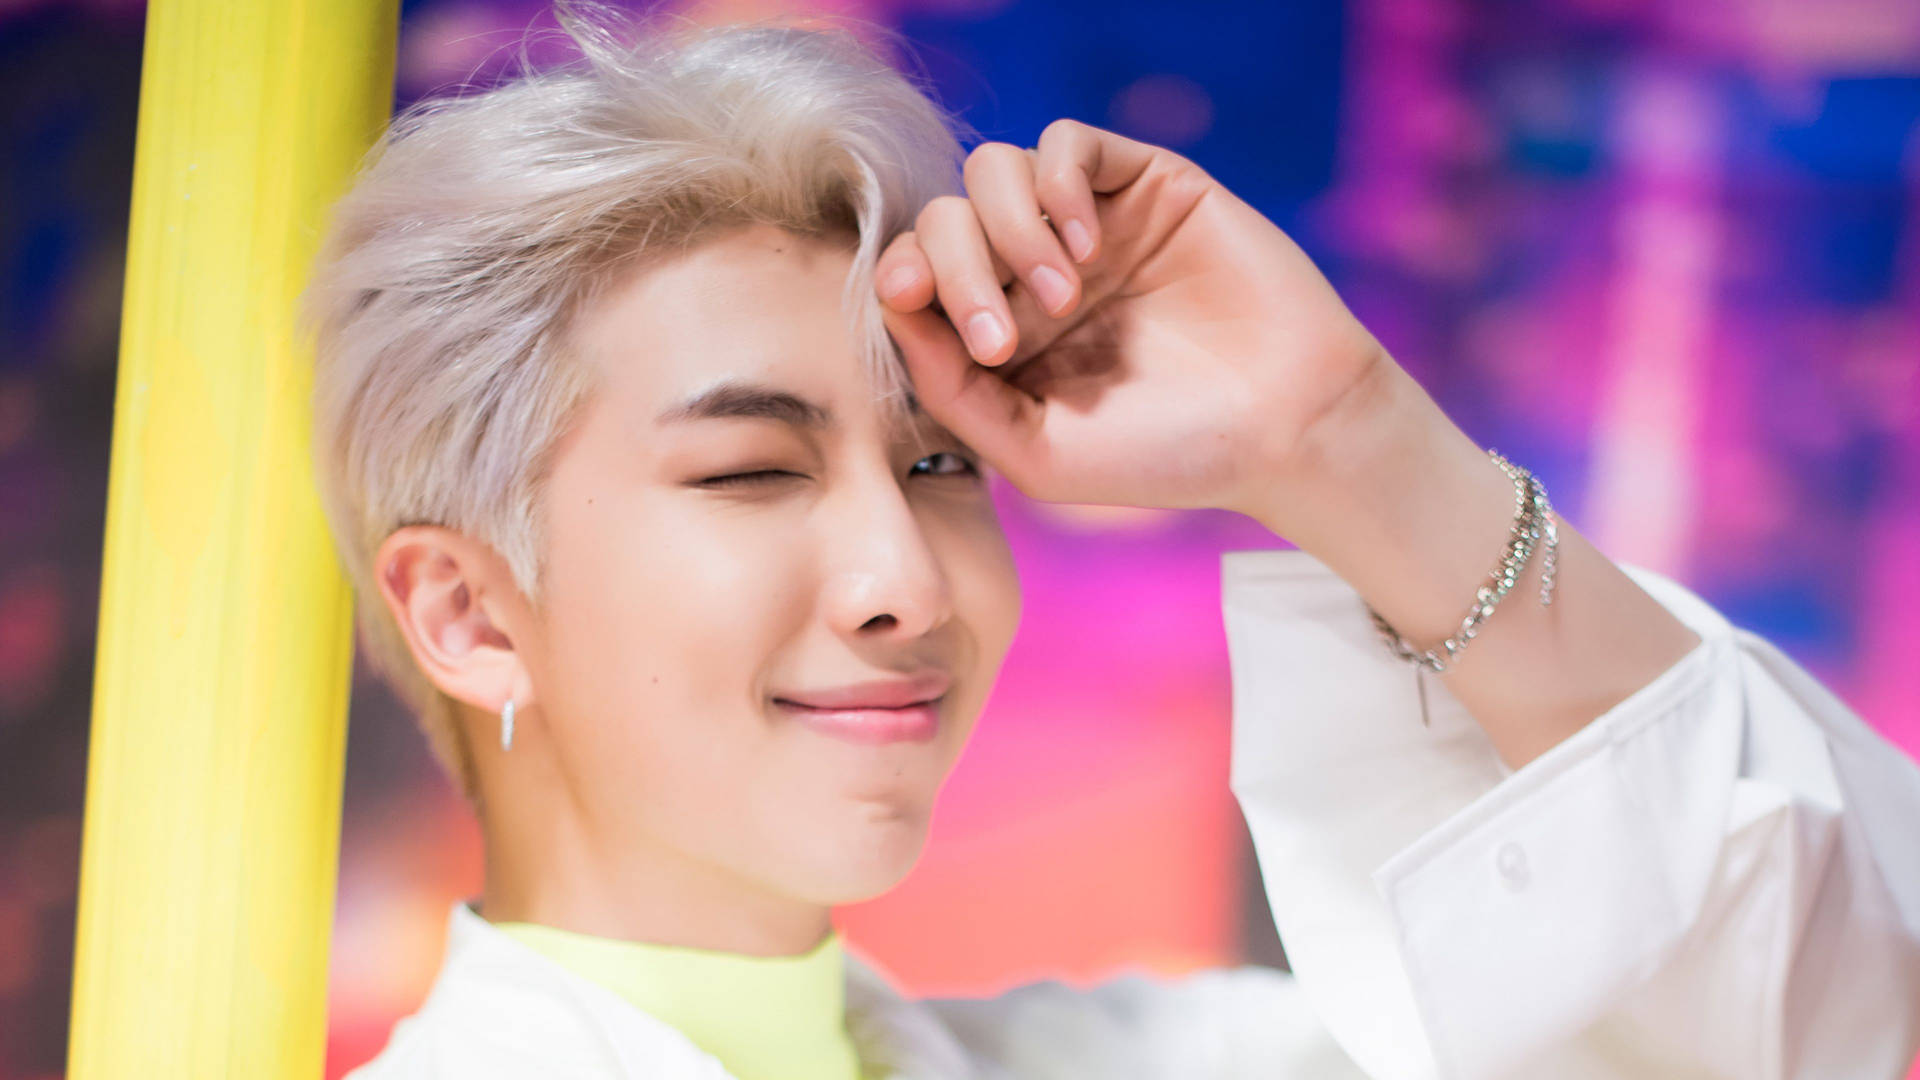 Rm Bts Boy With Luv Song Wallpaper